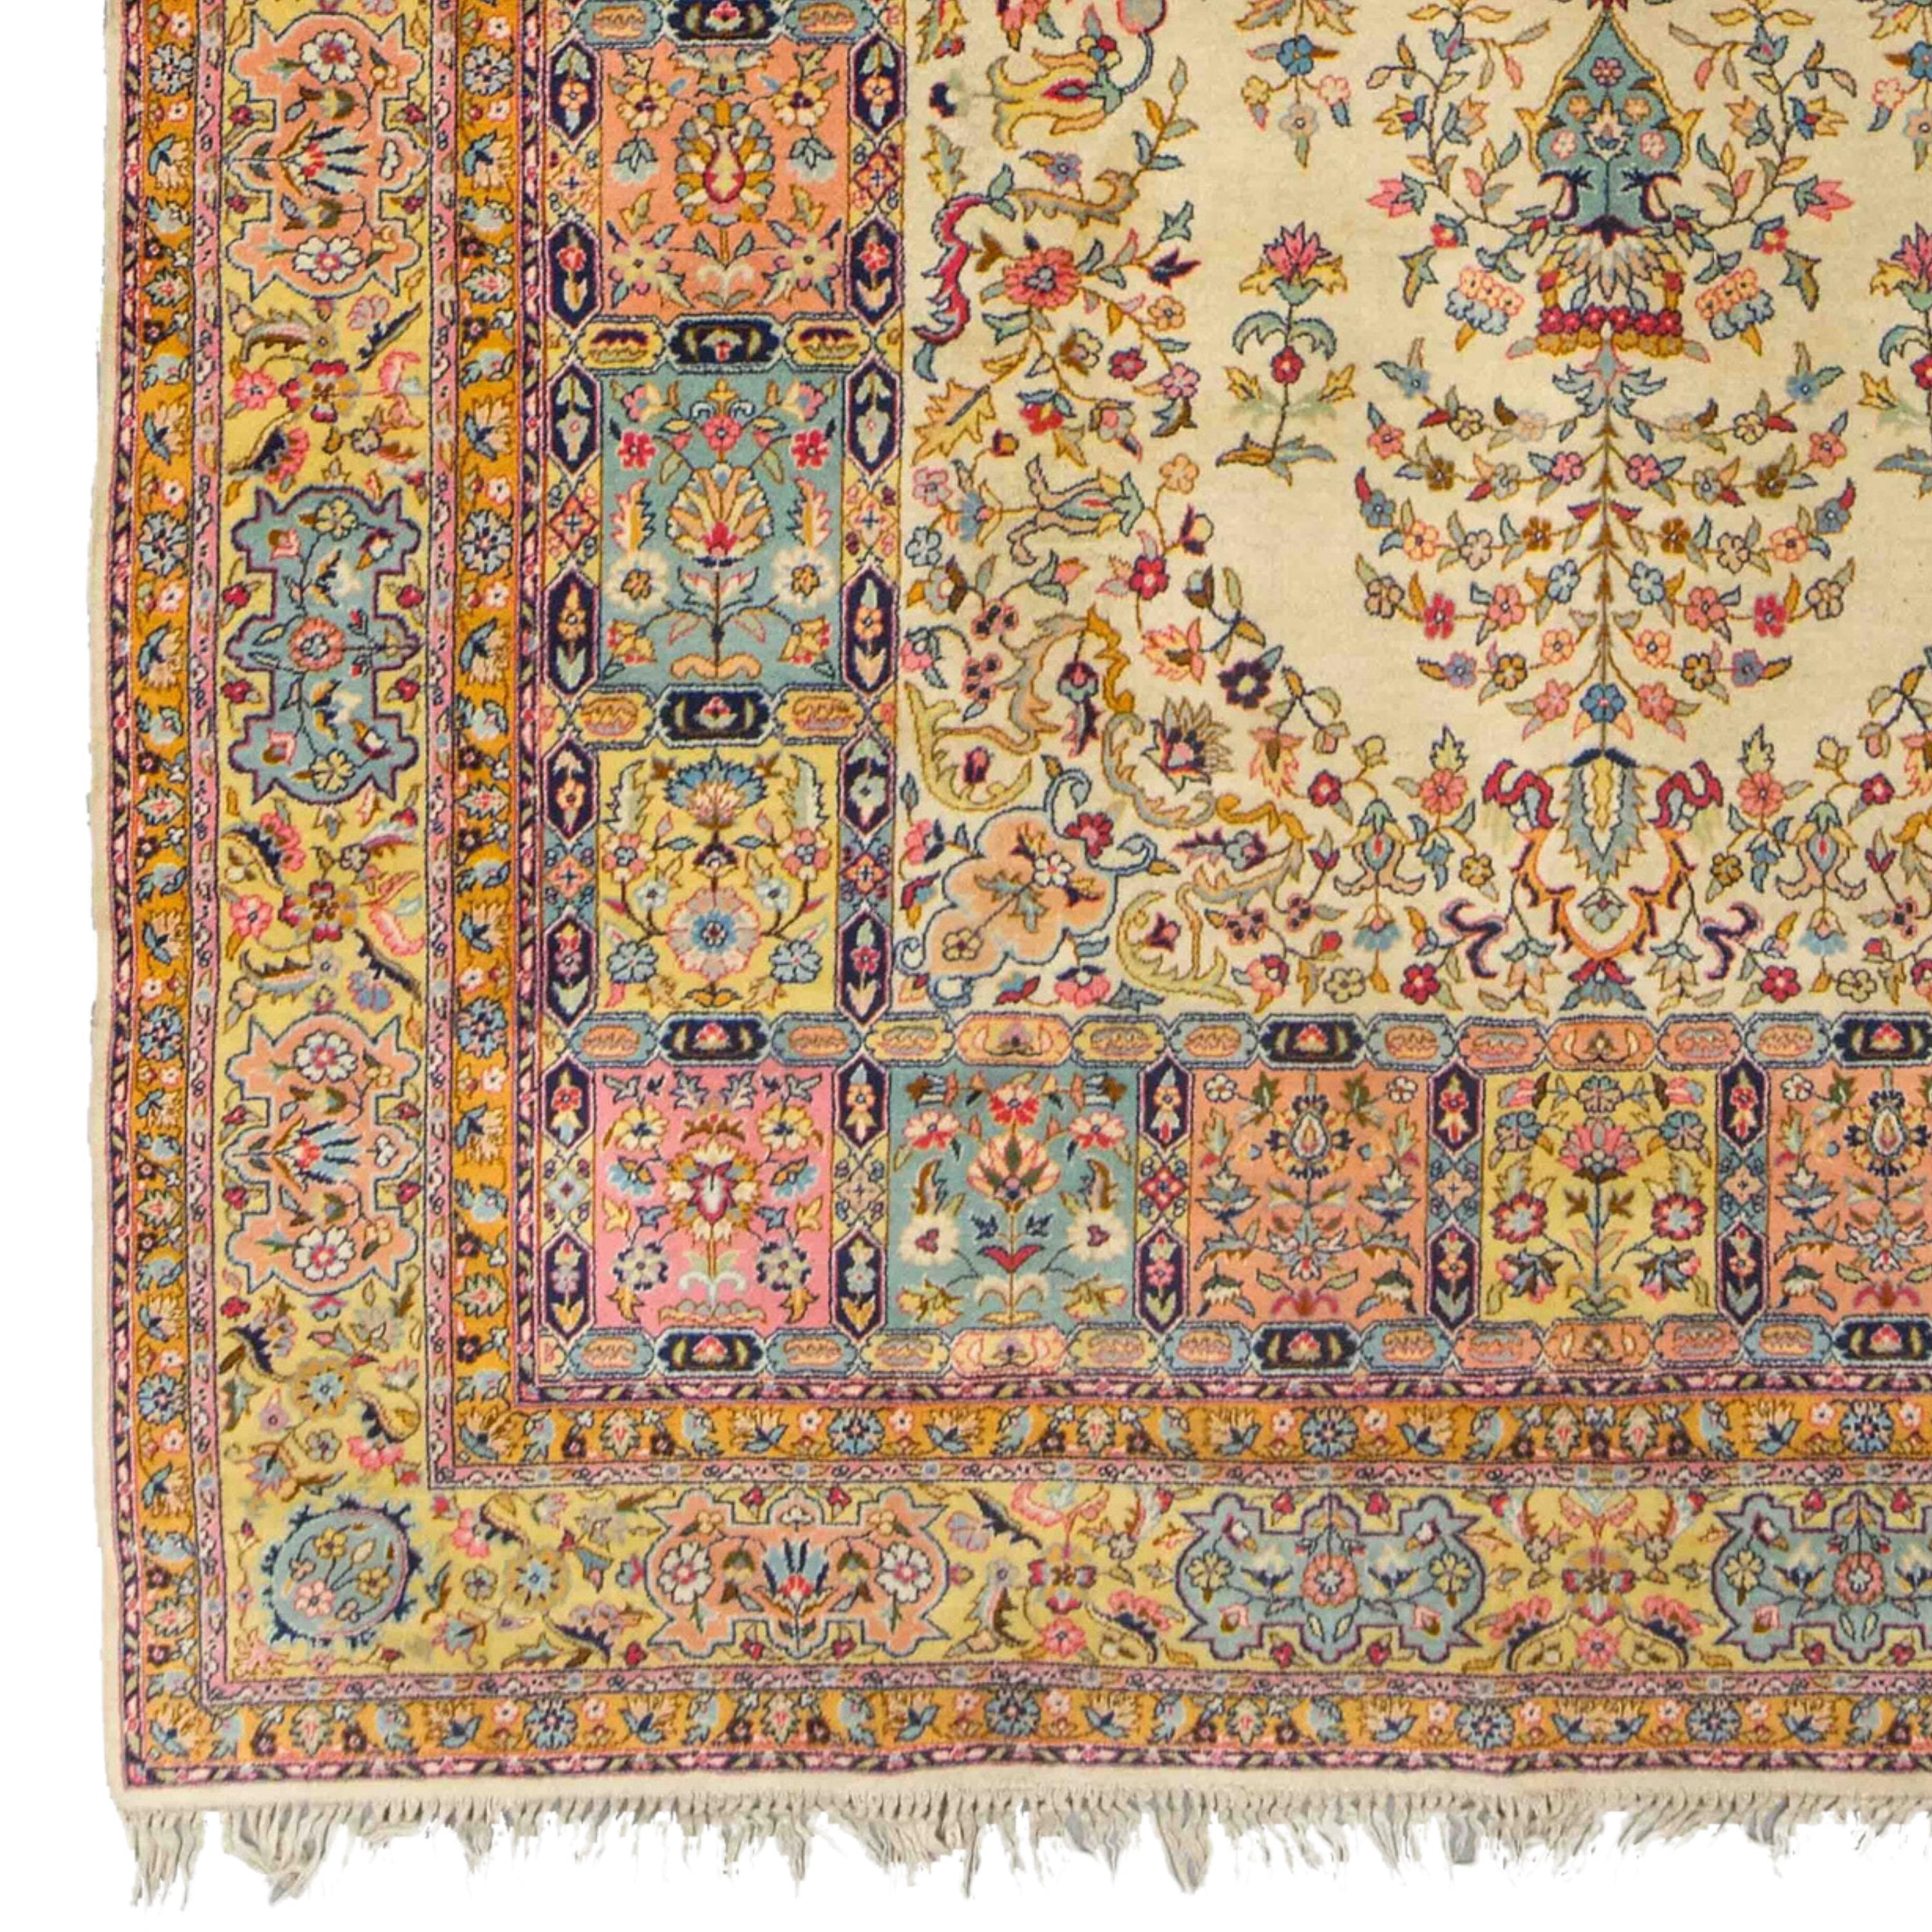 Antique Tabriz Rug 247x355 cm (8,10 x 11,64 ft) Late of 19th Century Tabriz Rug, Antique Tabriz Rug

From the mid-19th century, there was a revival in commercial carpet production in Azerbaijan, and Tabriz became one of the country's most important